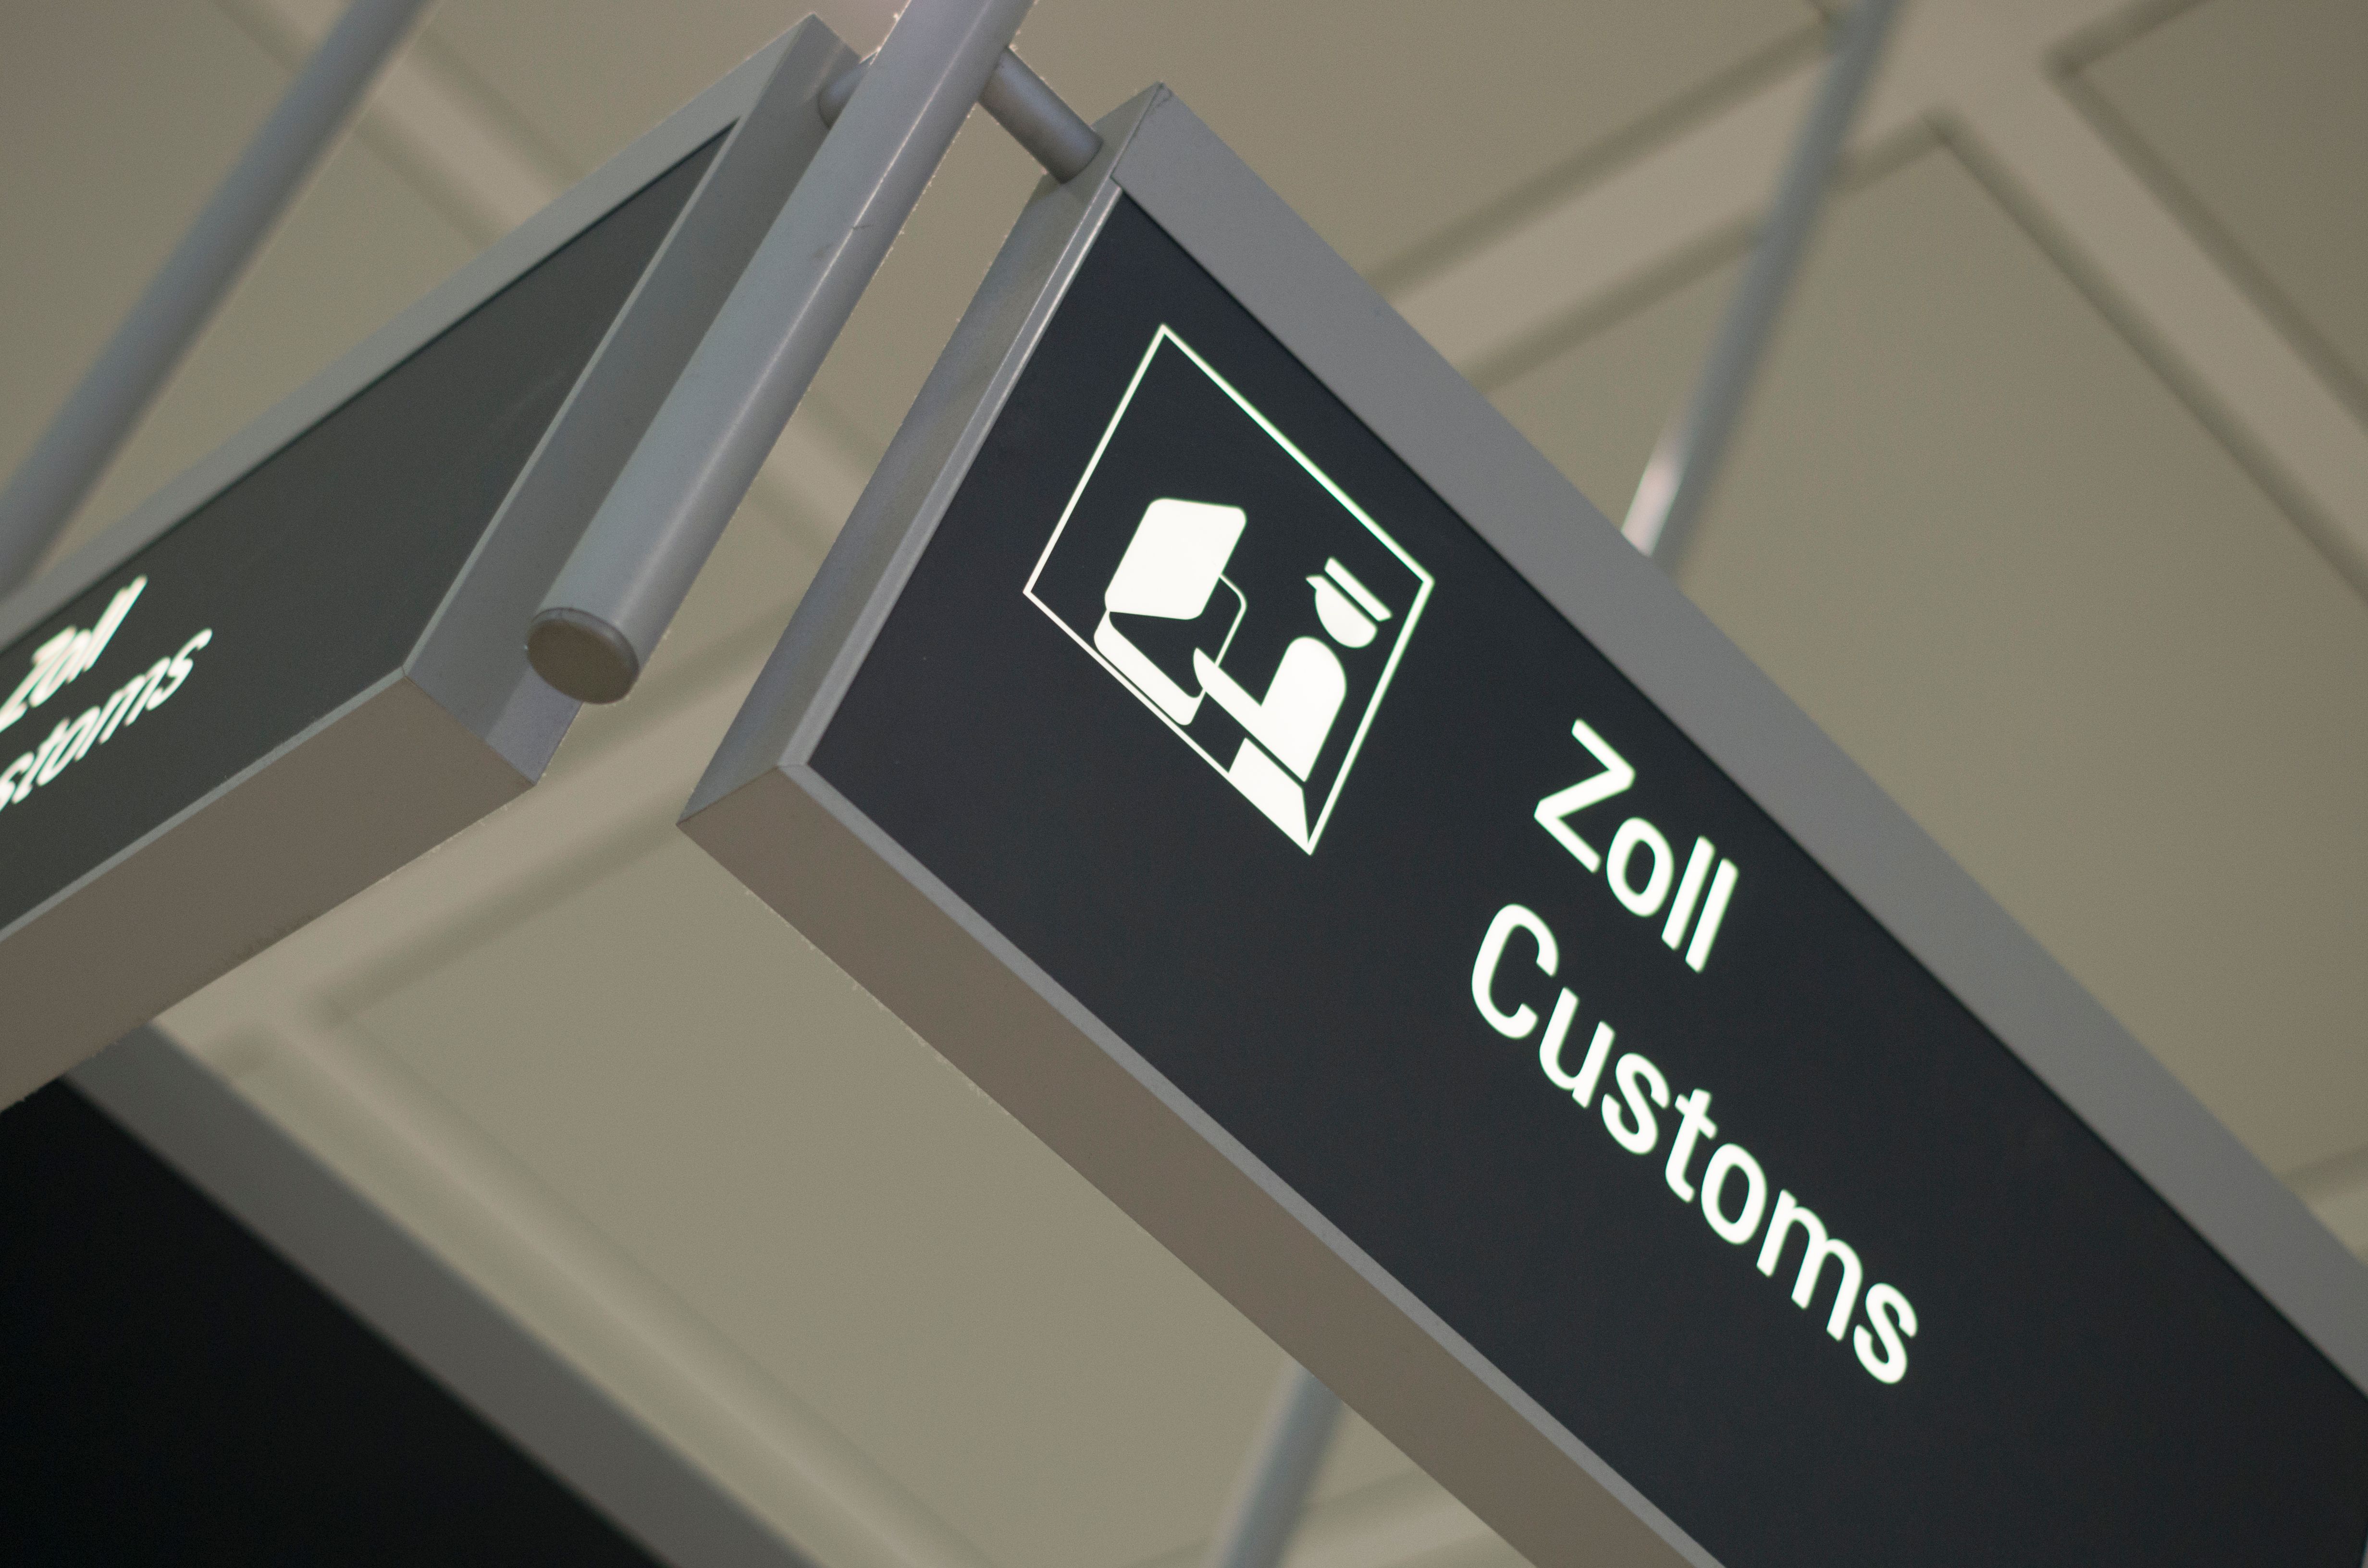 Customs Office signs at the airport in Munich, Germany